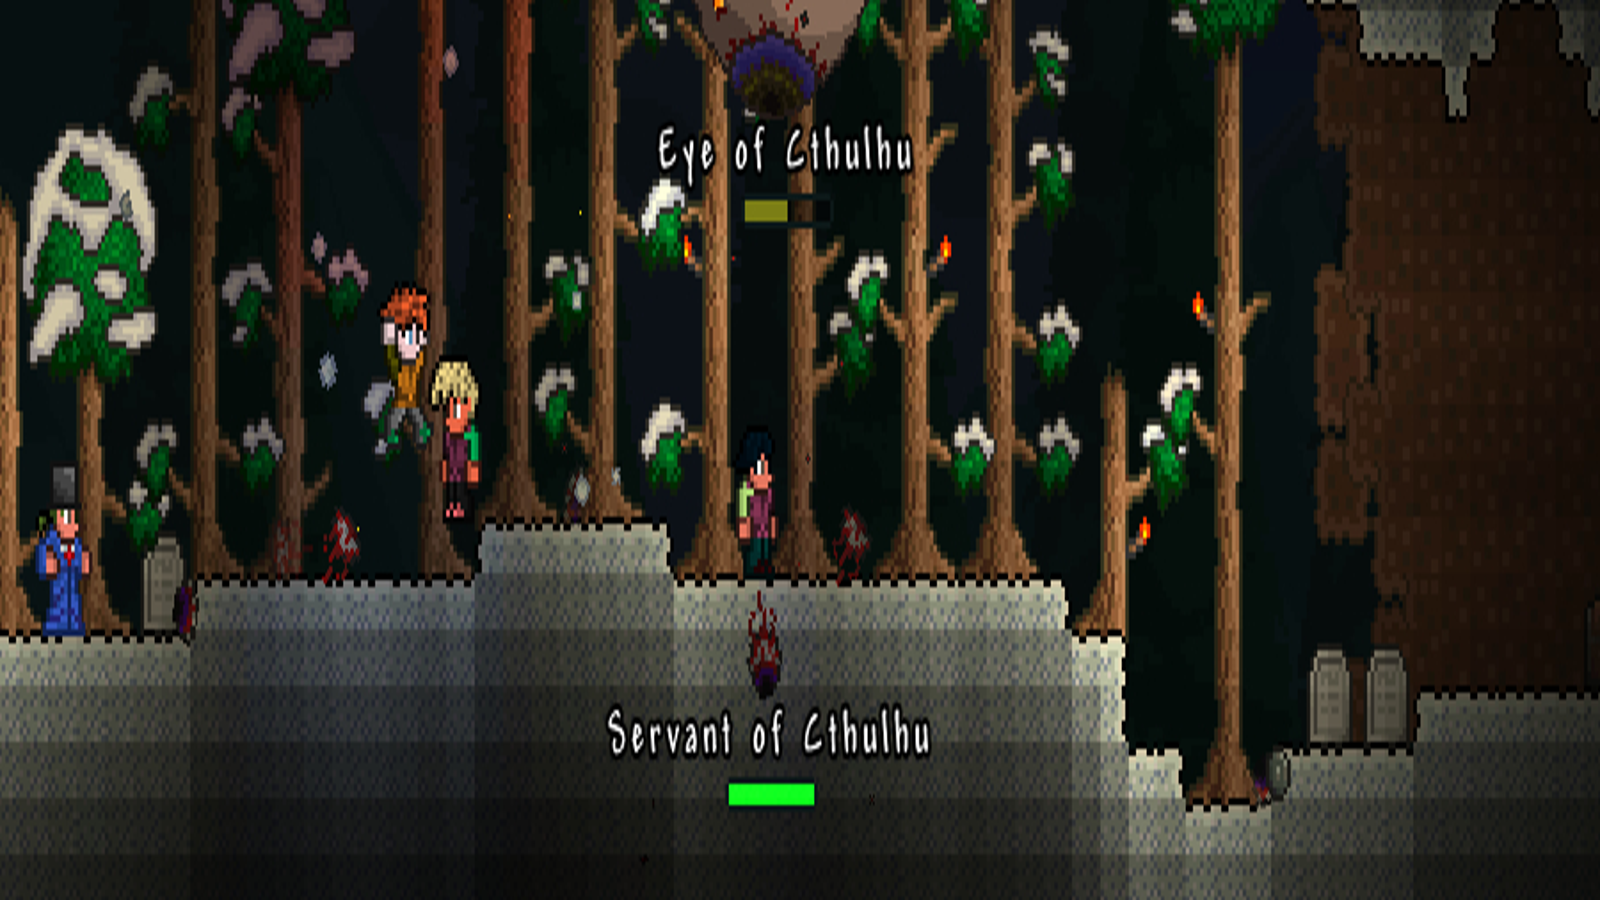 Does Terraria Have Crossplay?